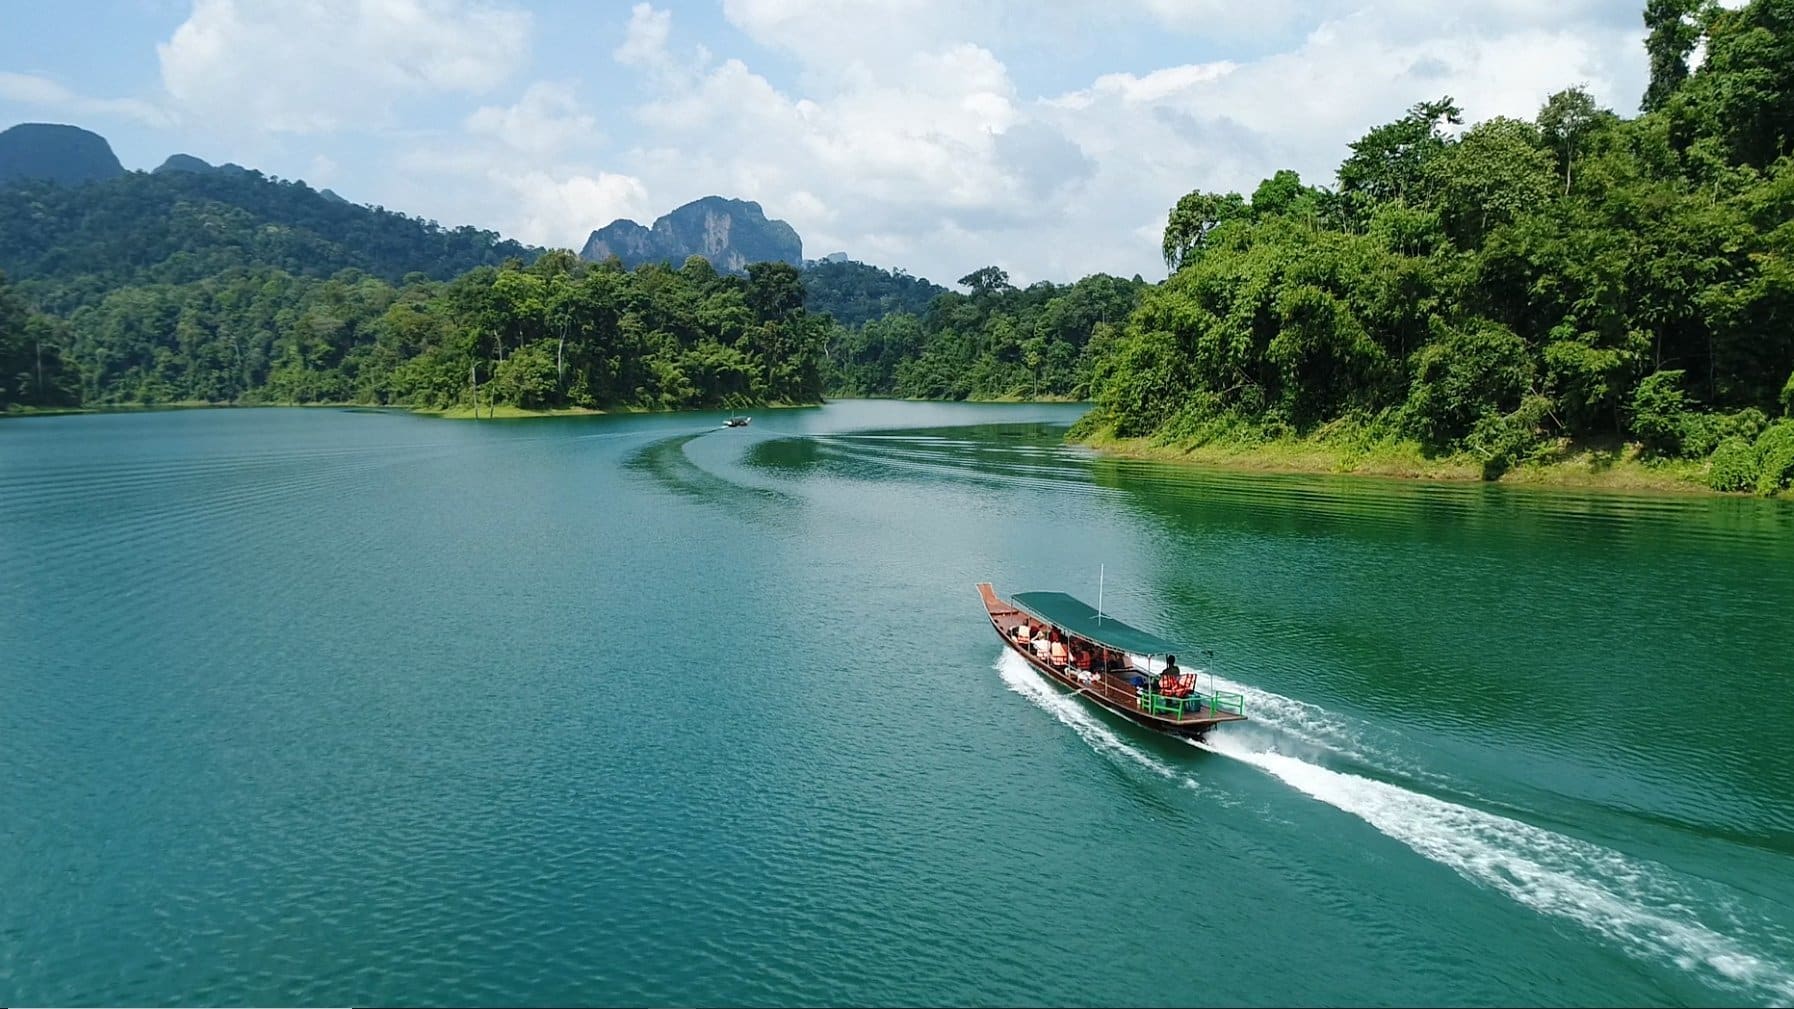 A Khao Sok National Park tour boating on Cheow Larn Lake